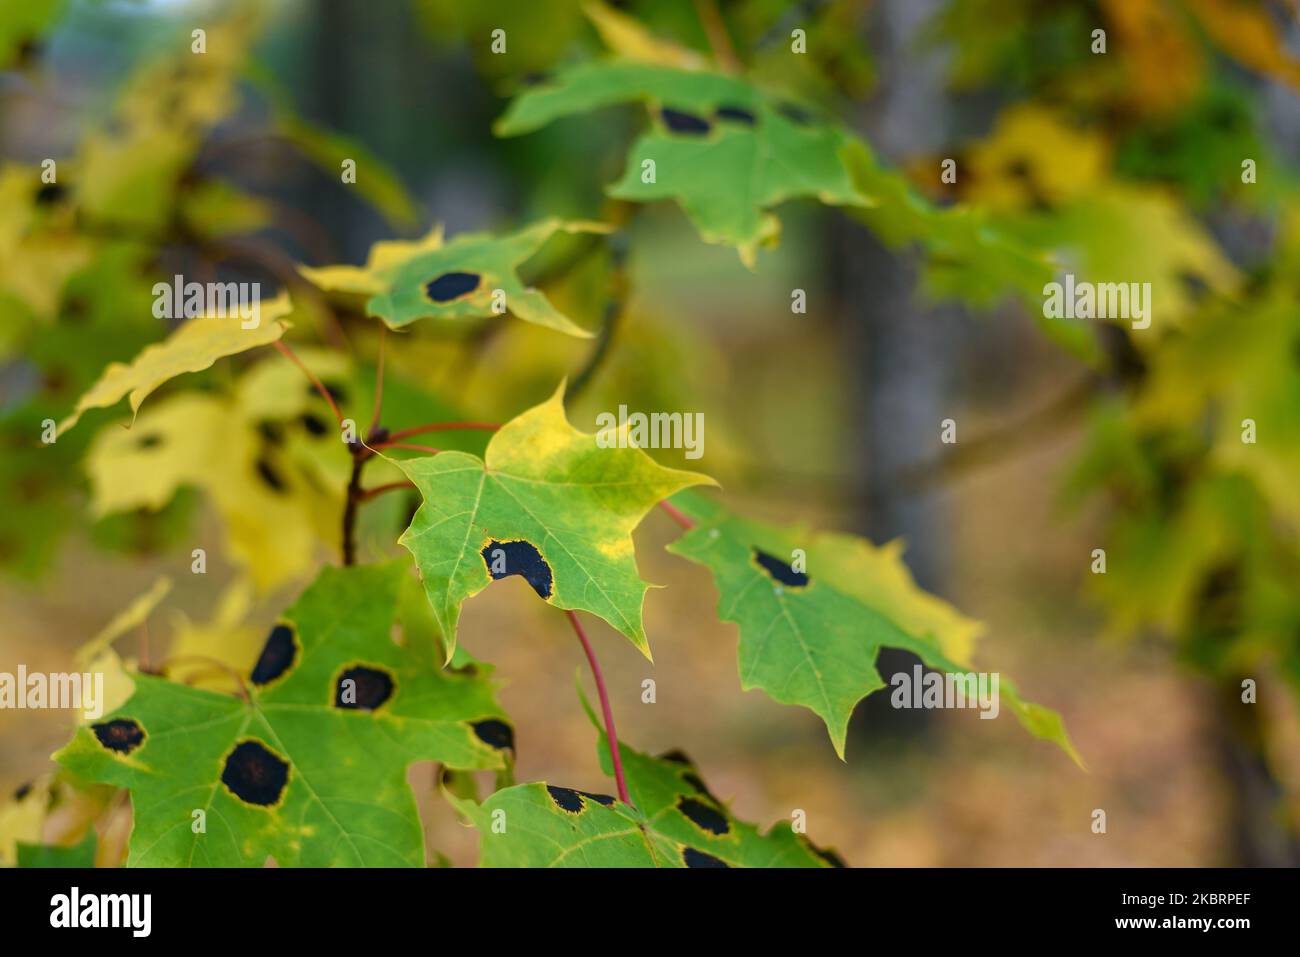 Maple leaves with Rhytisma tar spots in autumn Stock Photo